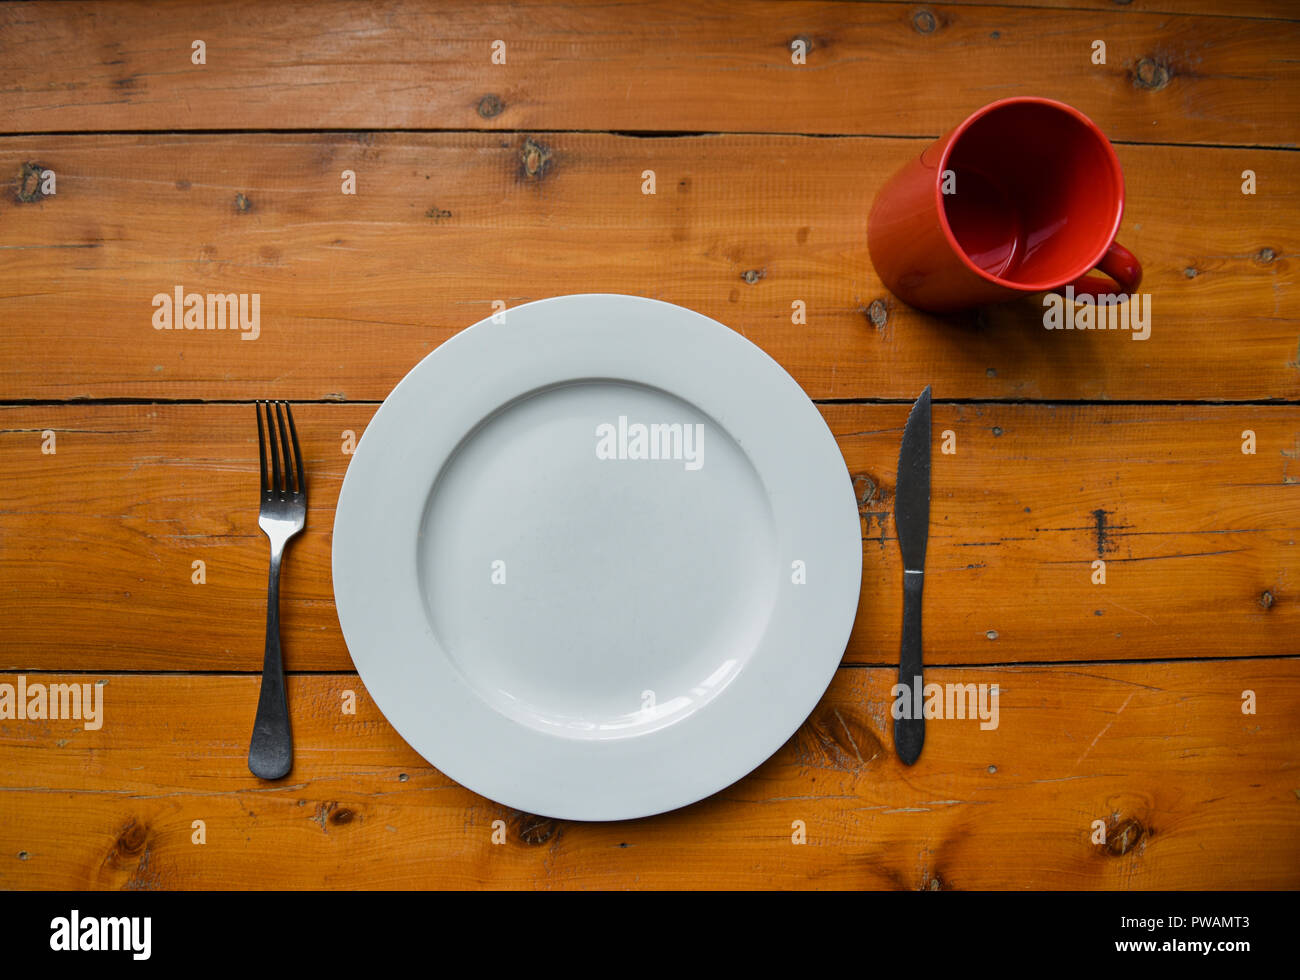 Top view of clean round white plate, silver fork and knife, red mug on a wooden table Stock Photo